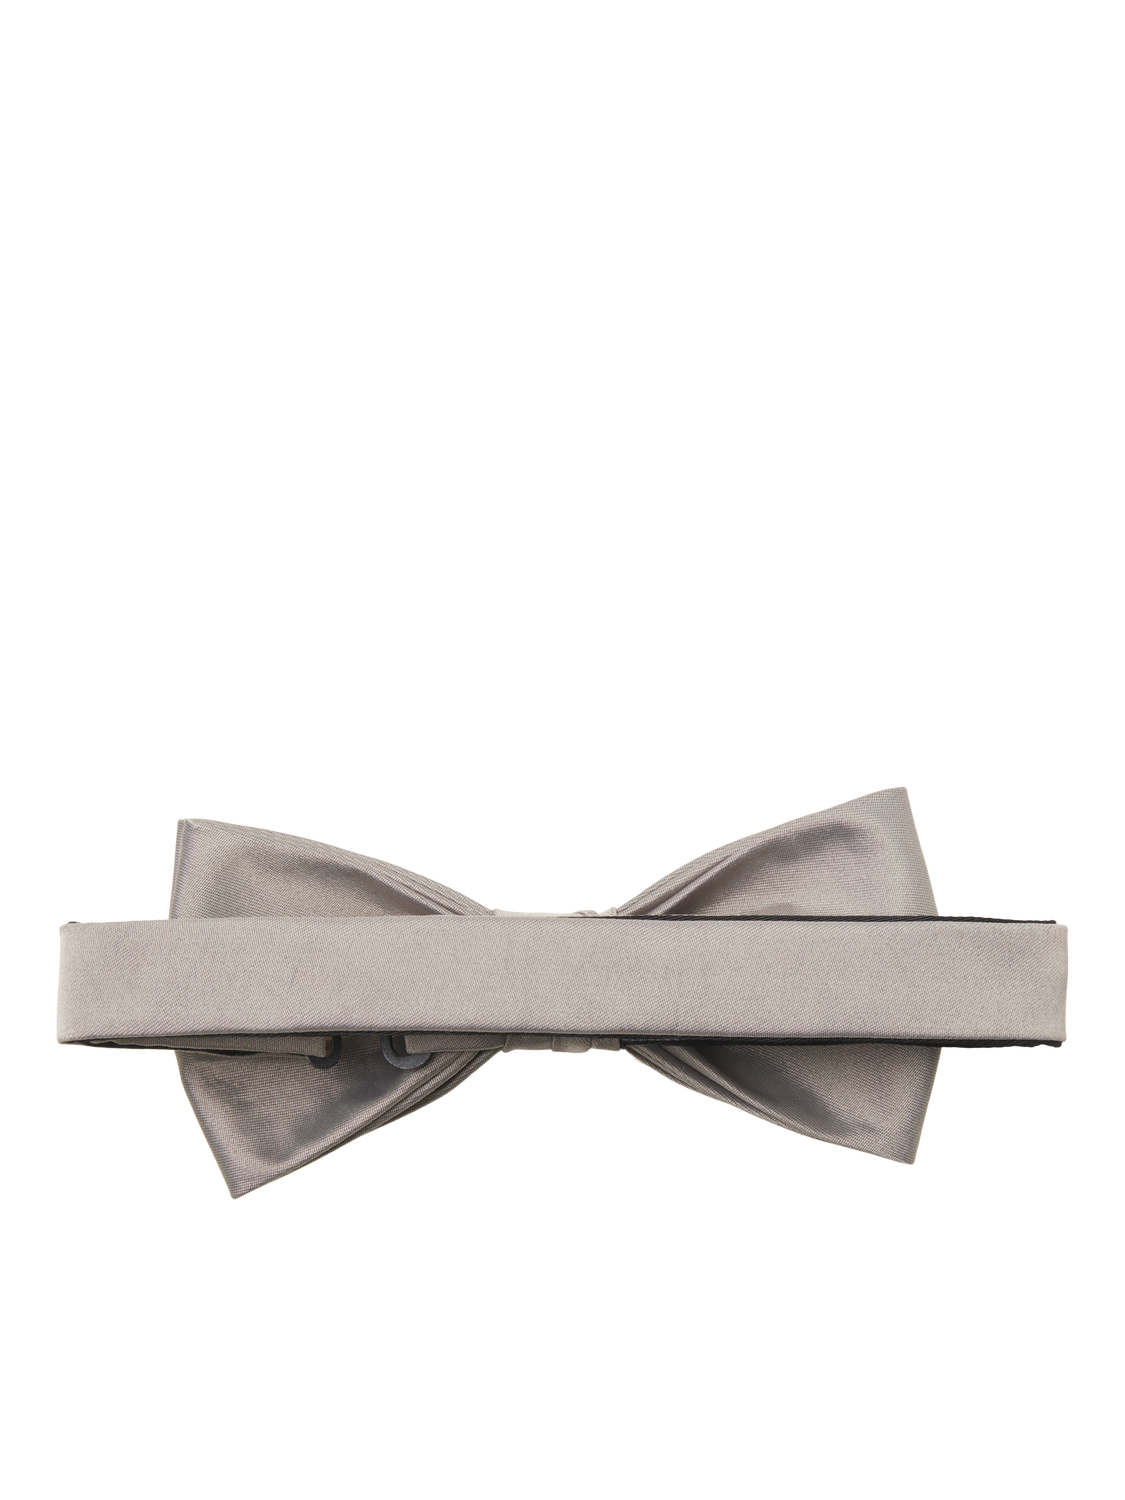 JACSOLID Bow Tie - Pure Cashmere